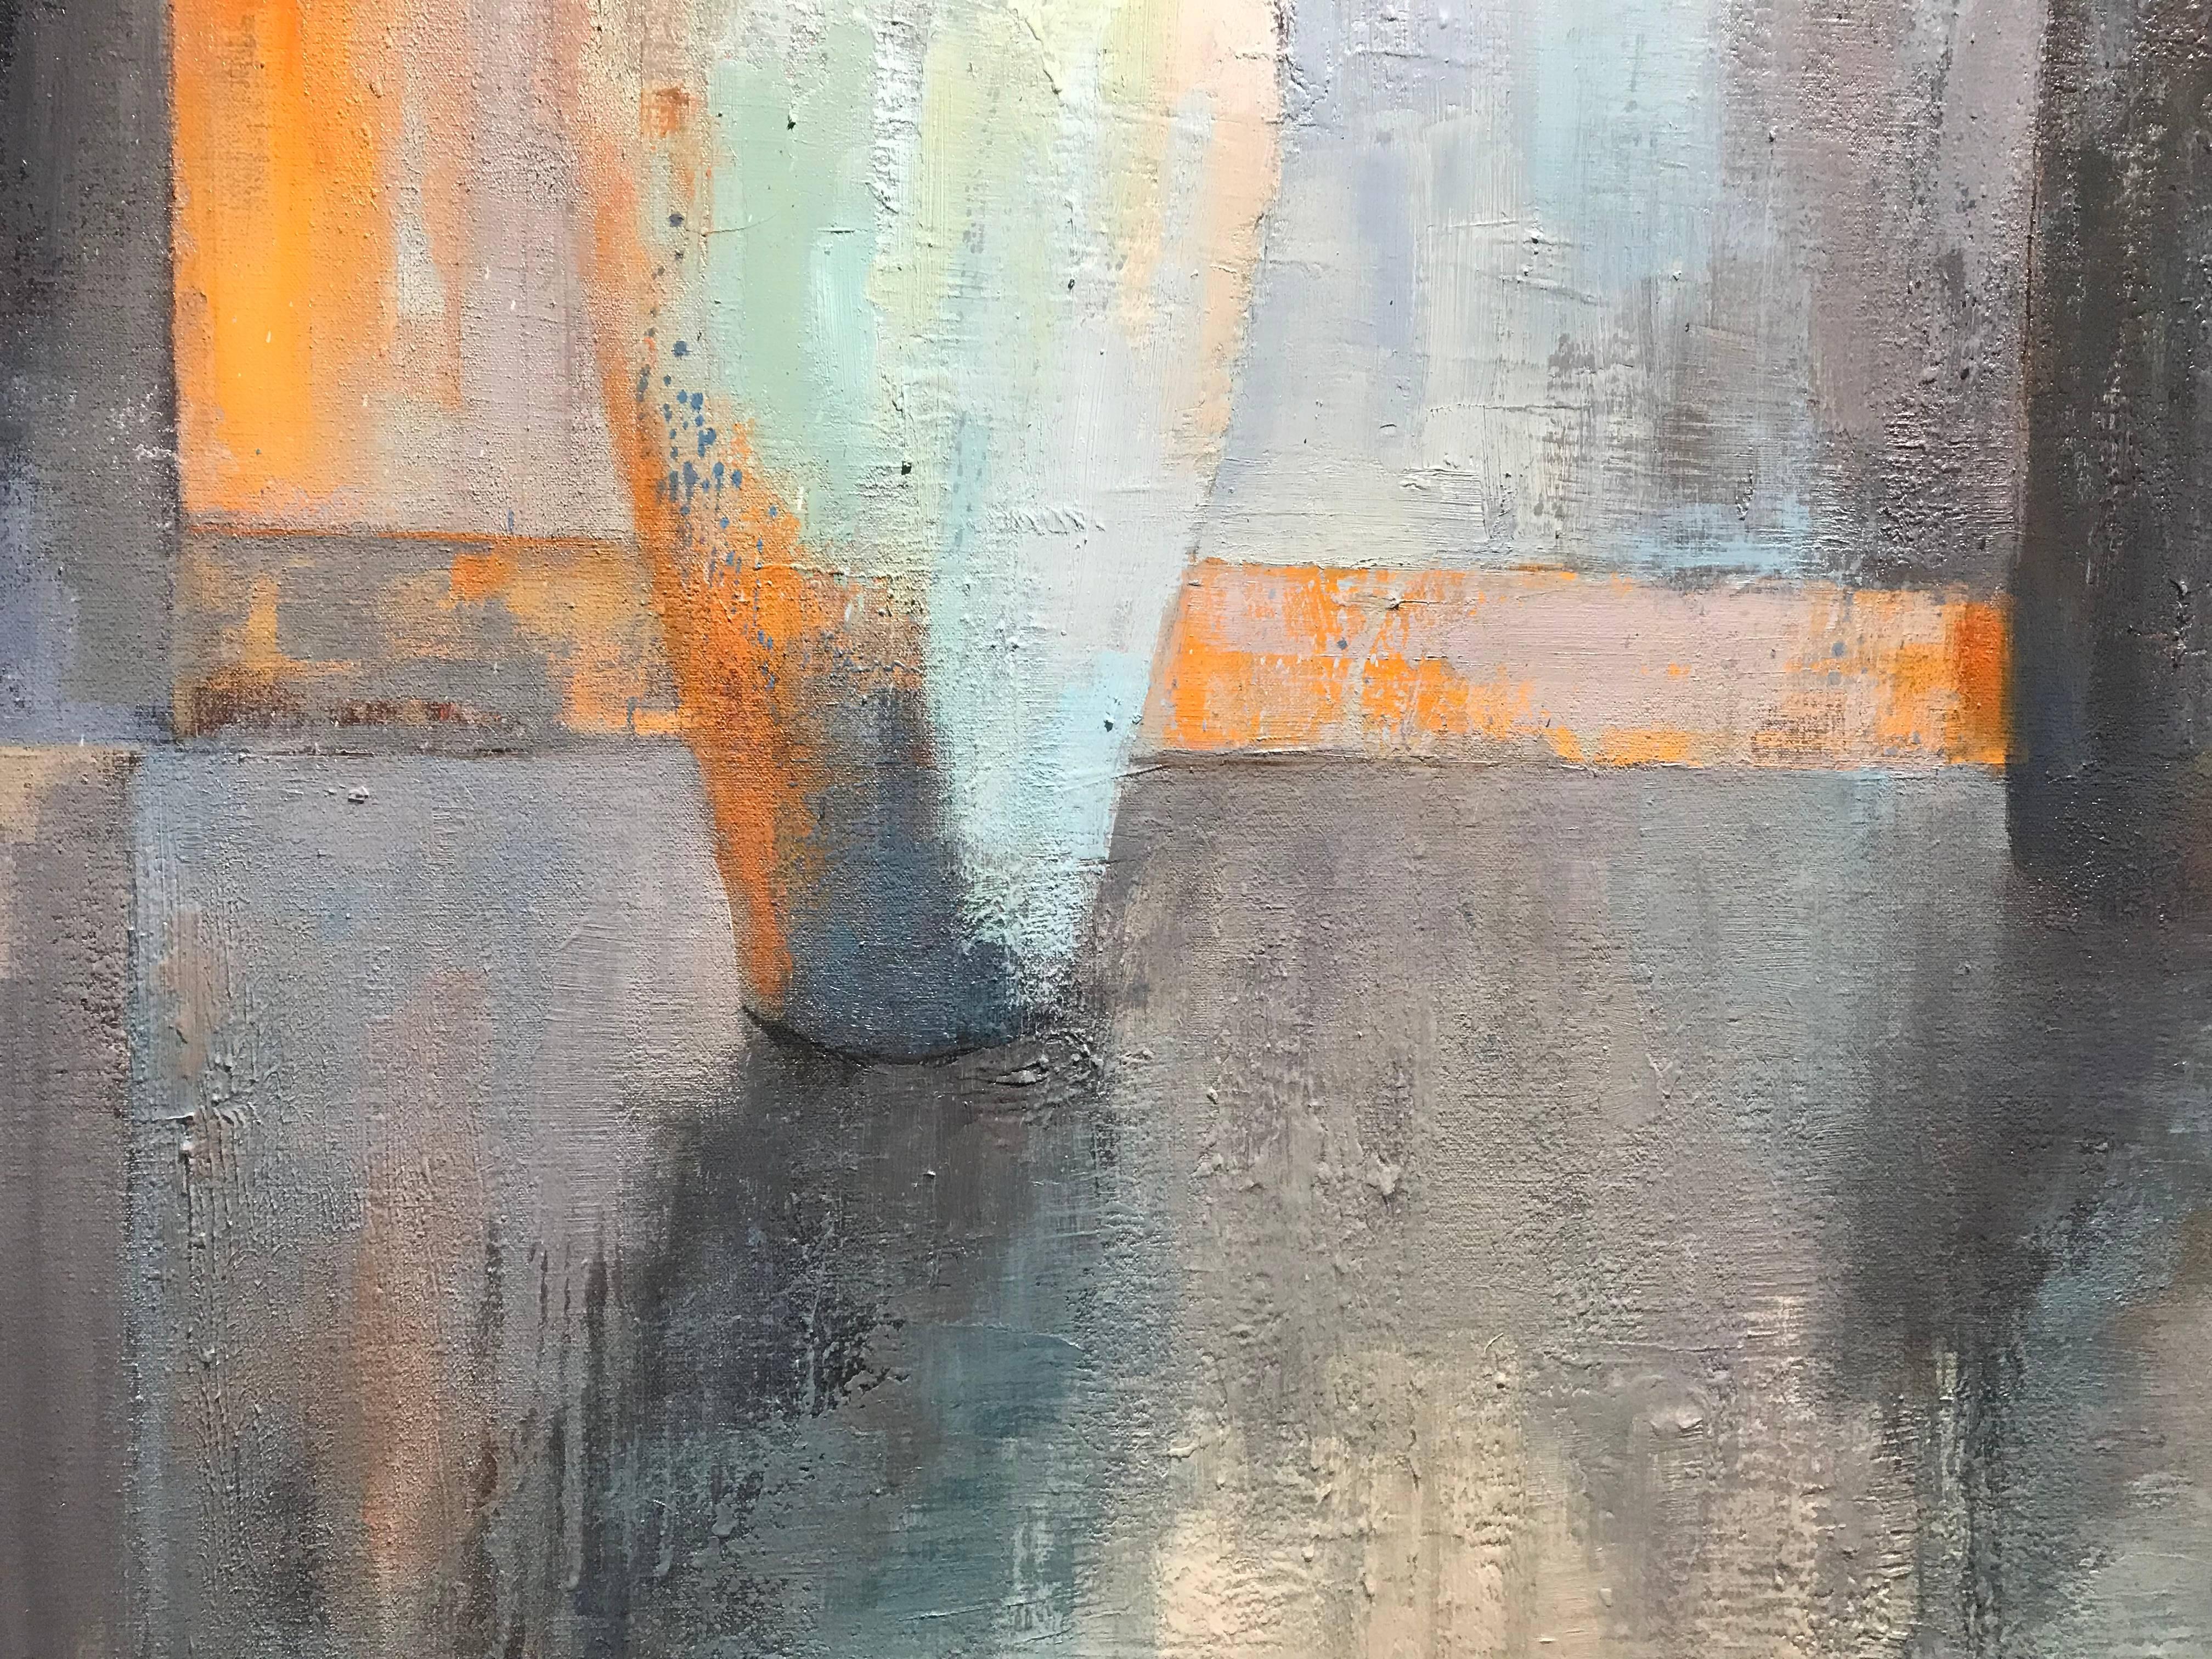 'Ray of Light' is a large Impressionist oil on canvas floral painting created by American artist Angela Nesbit in 2018. This square format features a palette made mostly of blue and white tones accented by delicate orange strokes. The artist